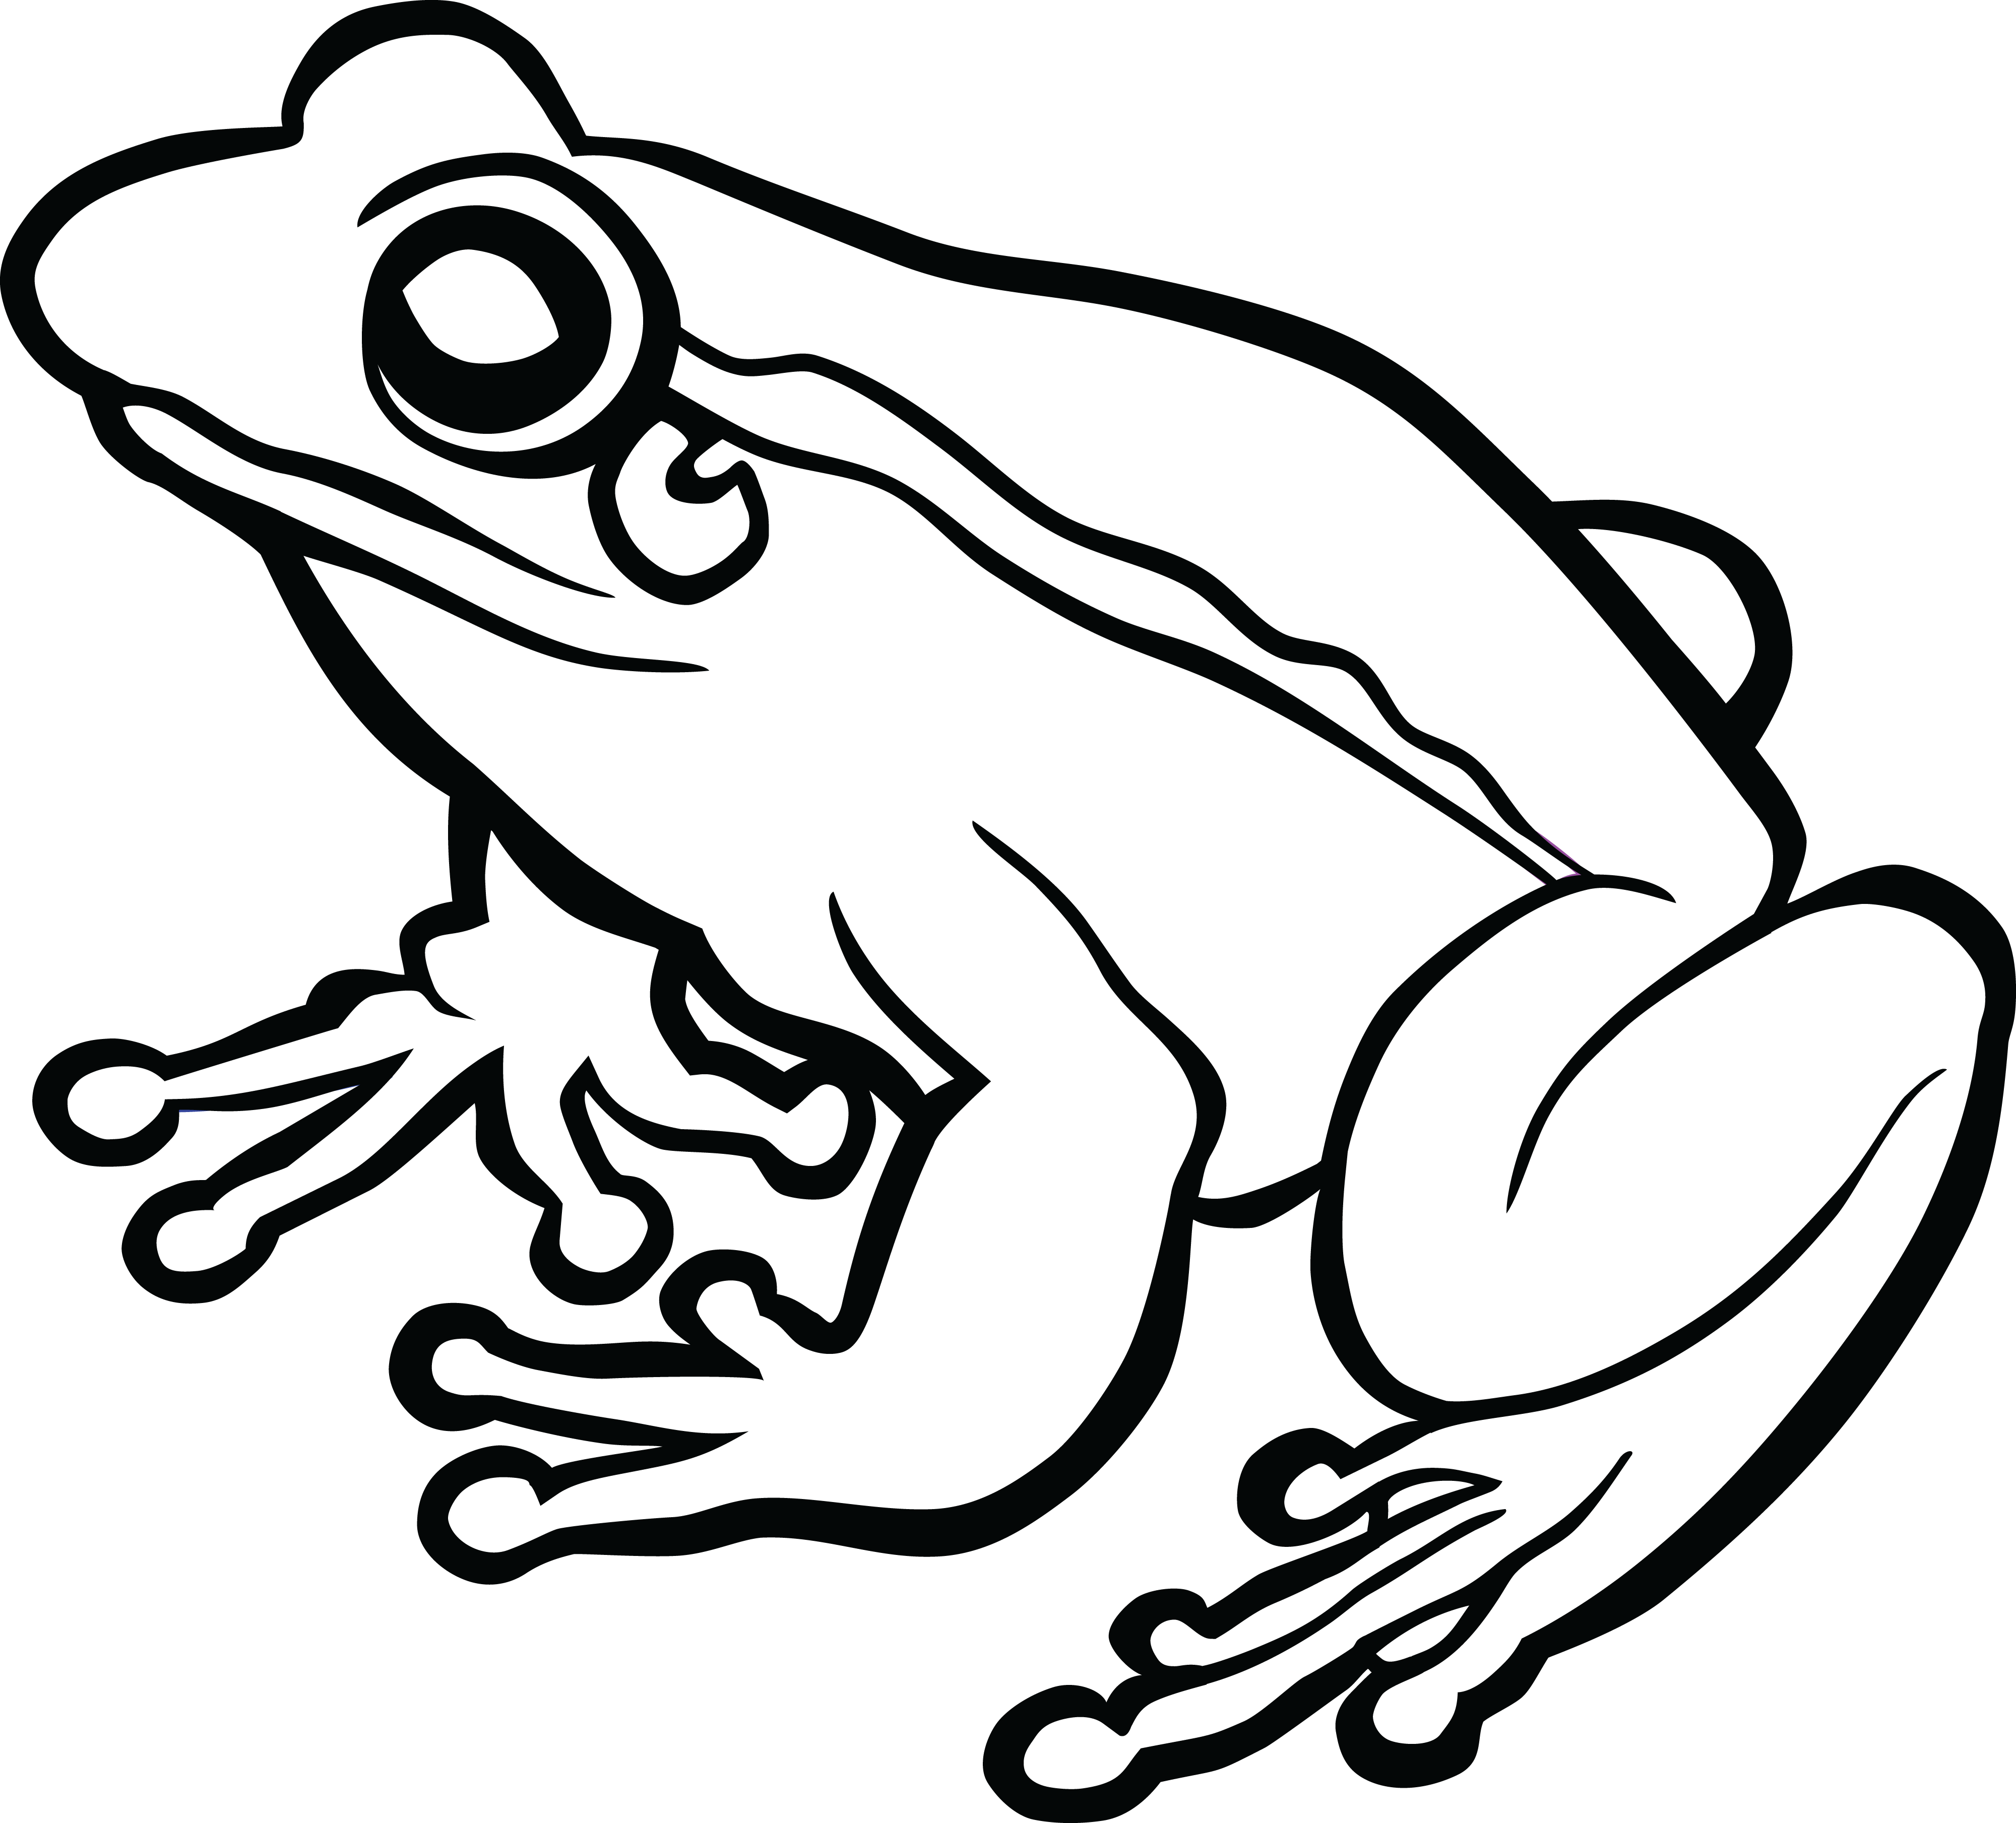 frog-clipart-black-white-outl